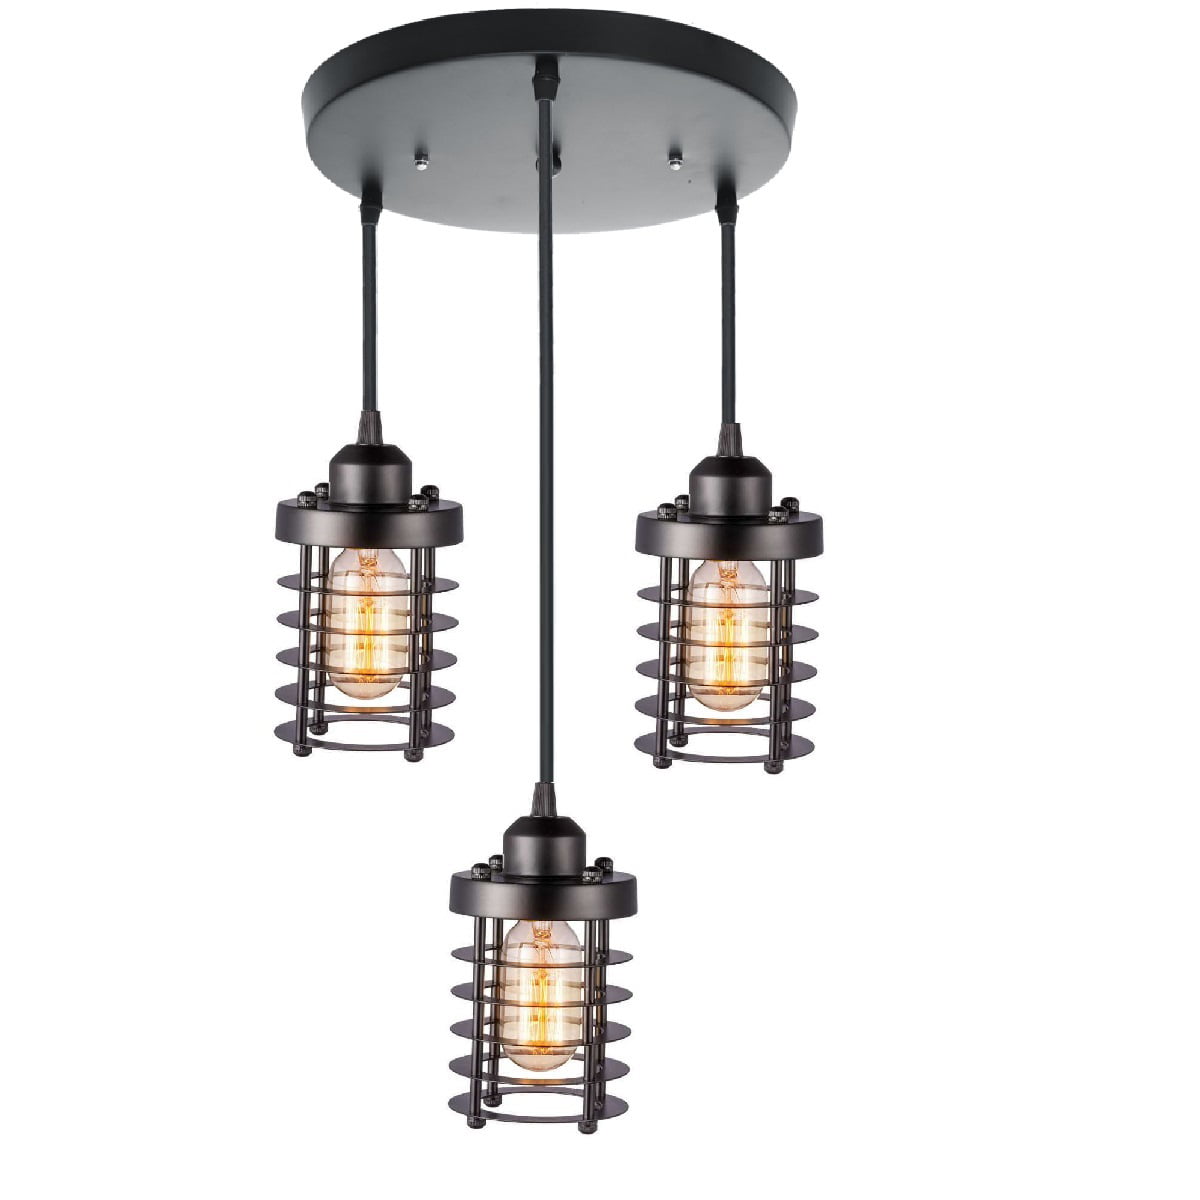 Industrial Metal Cage Ceiling Light Adjustable Height for Kitchen Island Living Room Dining Room Entry Black Lantern Pendant Hanging Light MOONSEA 4-Light Rustic Farmhouse Chandeliers Fixture